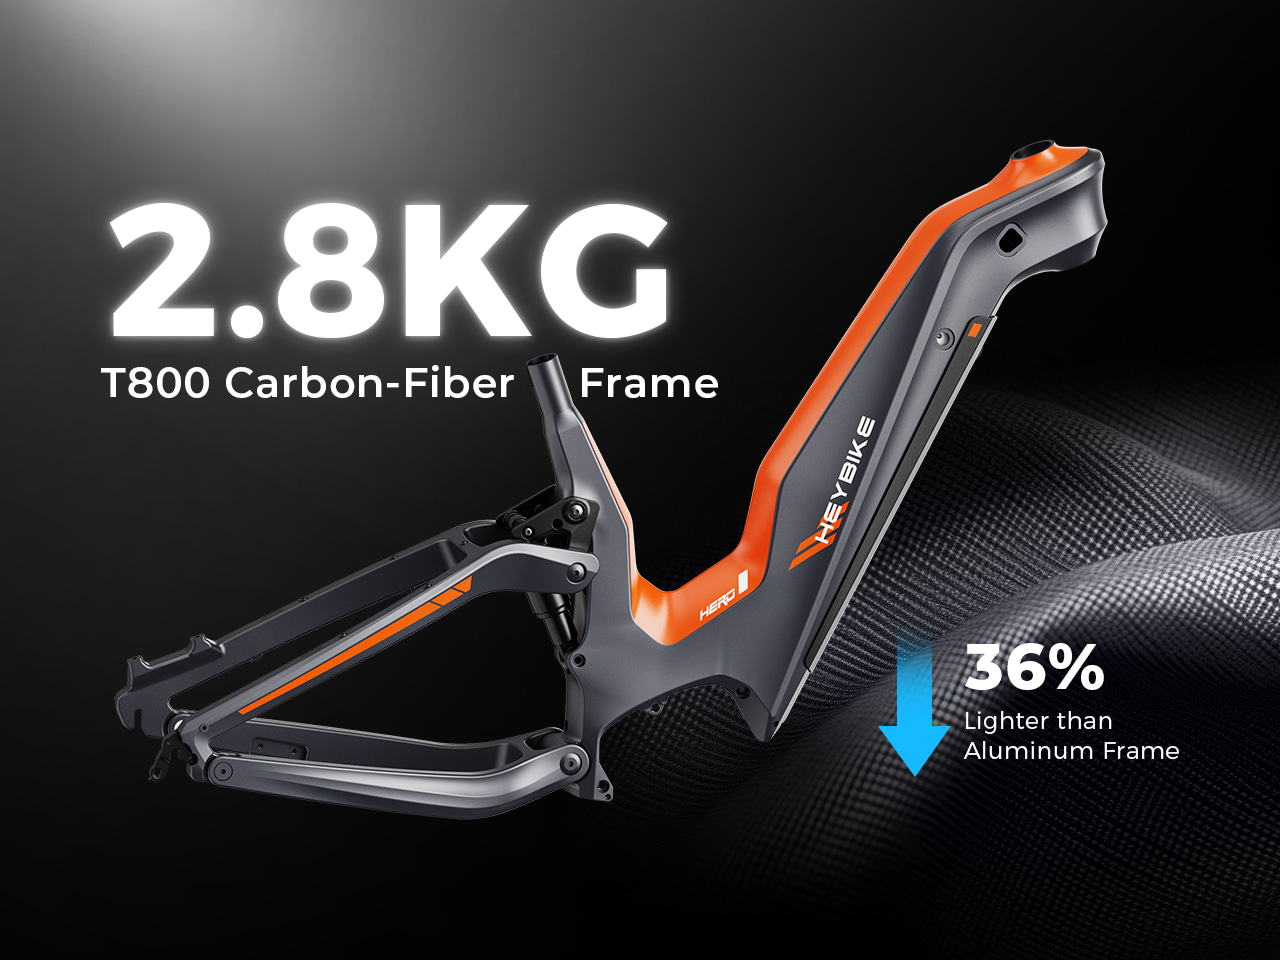 HERO T800 carbon-fiber mainframe guarantees durability, reduced weight, and minimized wind resistance. Weighing only 2.8kg, it's 36% lighter than aluminum, ensuring a smoother, more comfortable ride.